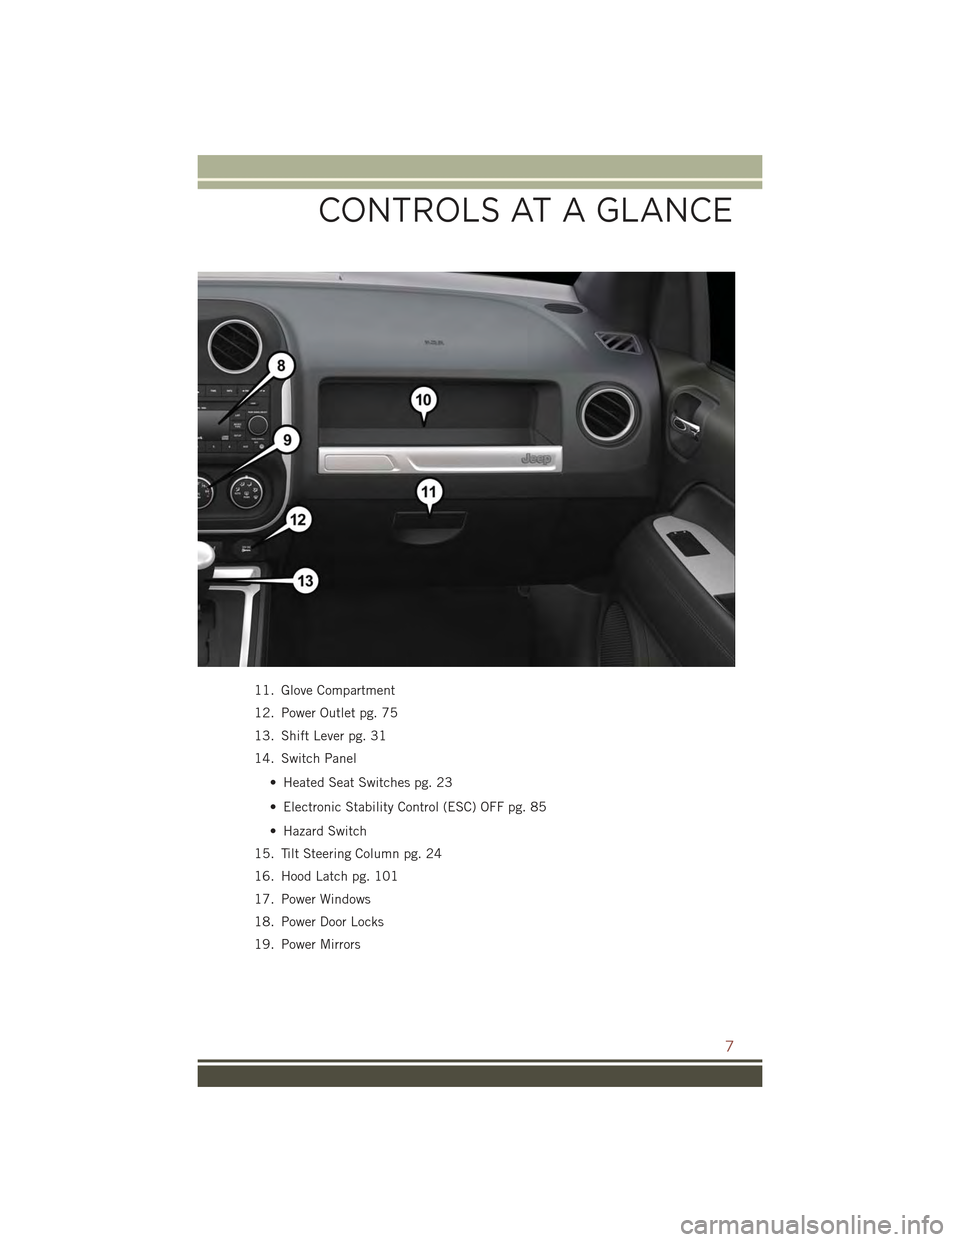 JEEP COMPASS 2015 1.G User Guide 11. Glove Compartment
12. Power Outlet pg. 75
13. Shift Lever pg. 31
14. Switch Panel
• Heated Seat Switches pg. 23
• Electronic Stability Control (ESC) OFF pg. 85
• Hazard Switch
15. Tilt Steer